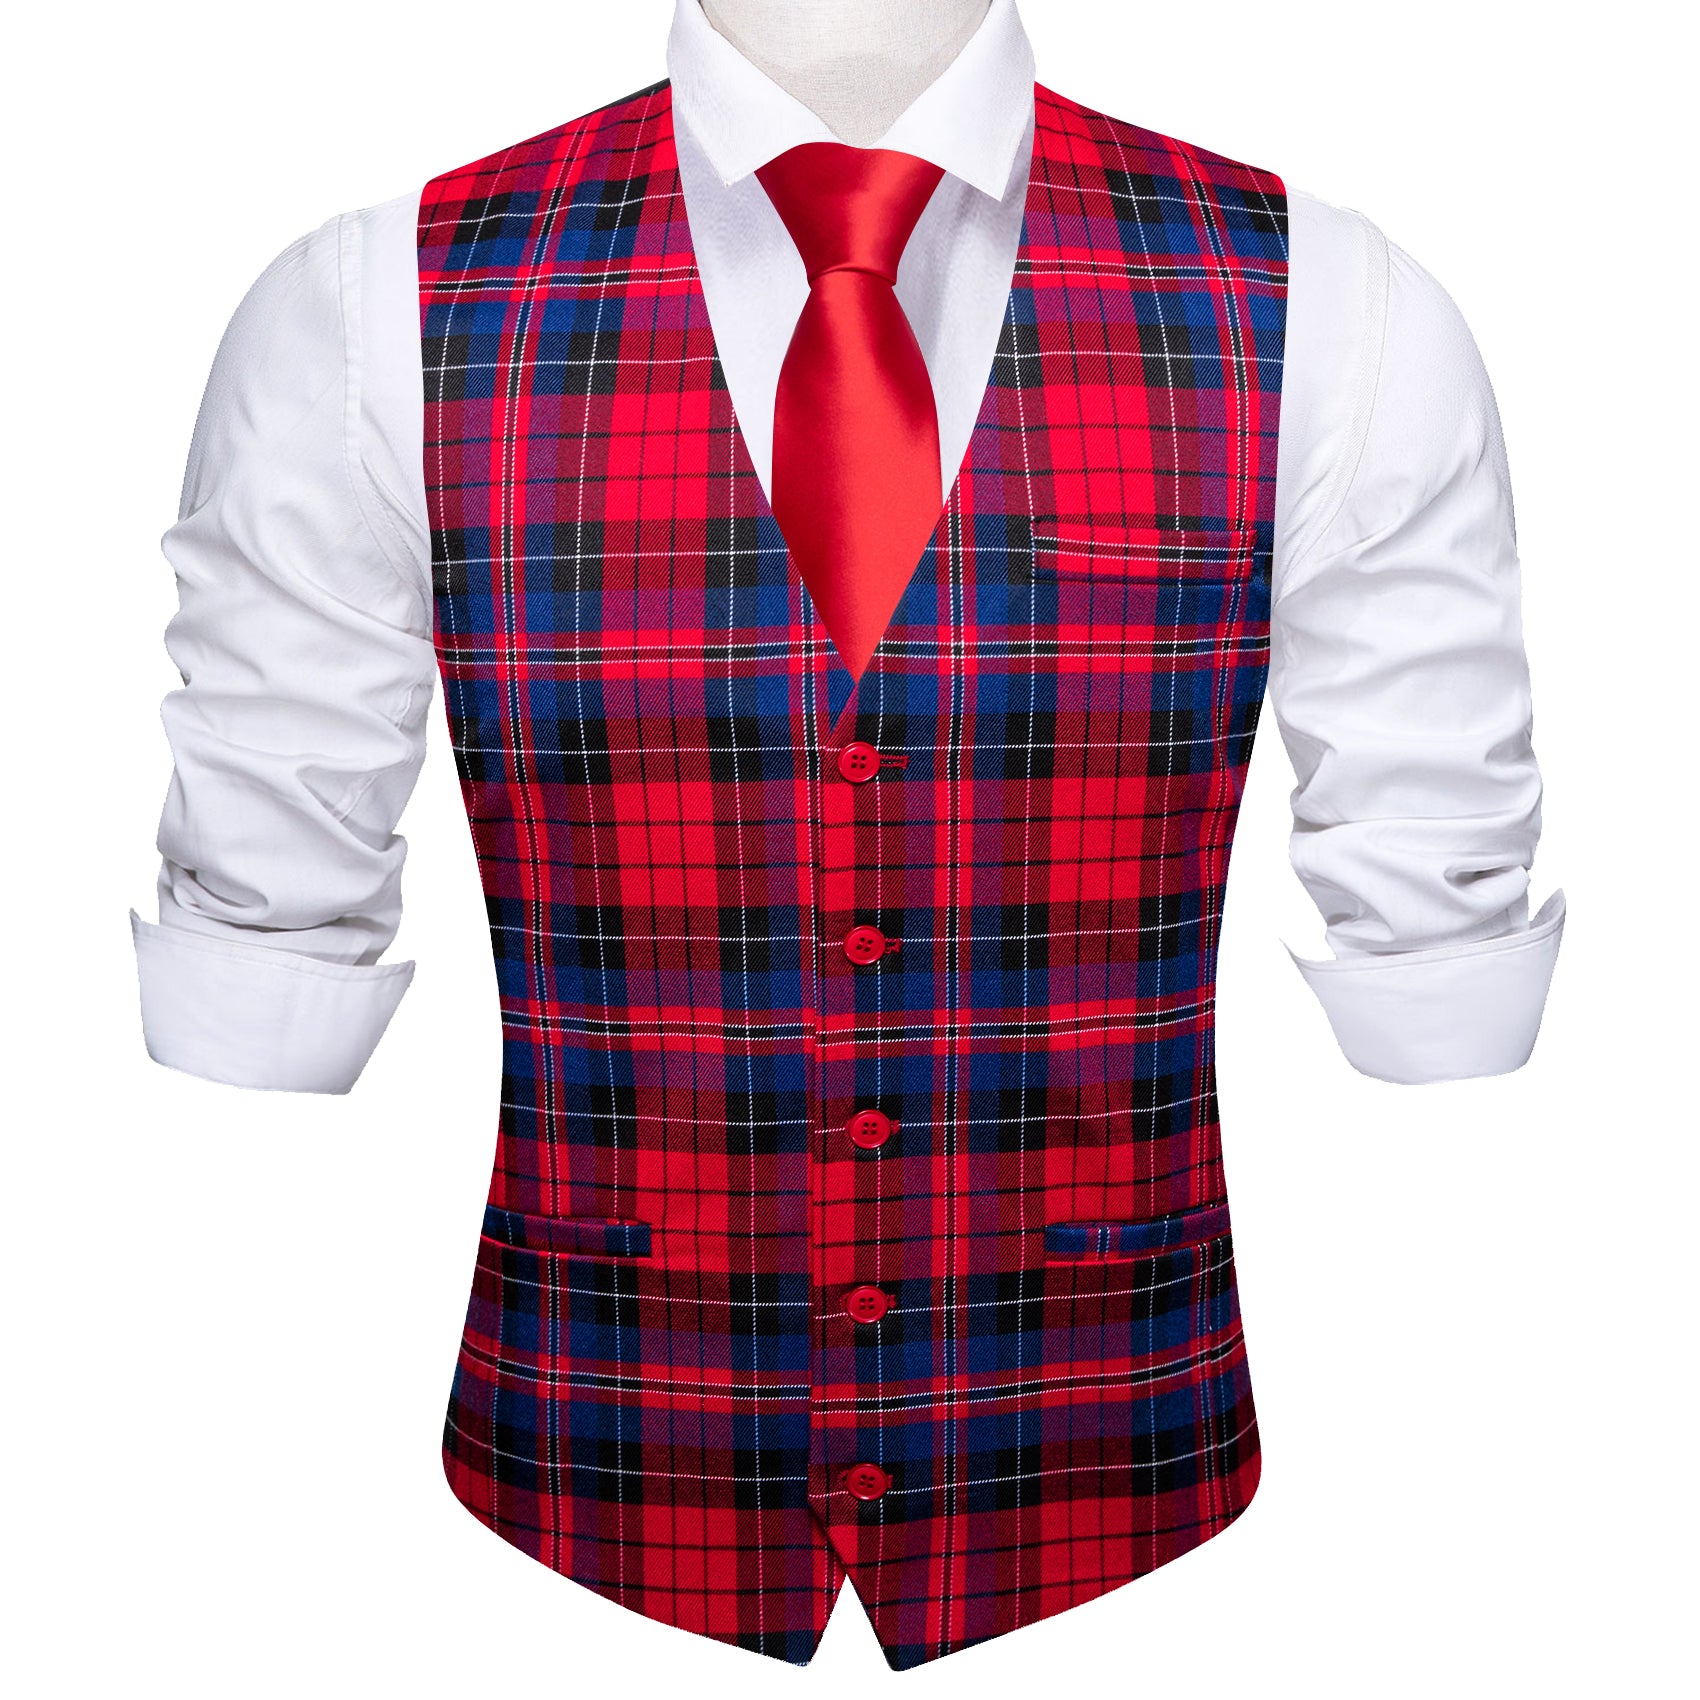 Barry.wang Causal Red Blue Plaid Waistcoat Vest